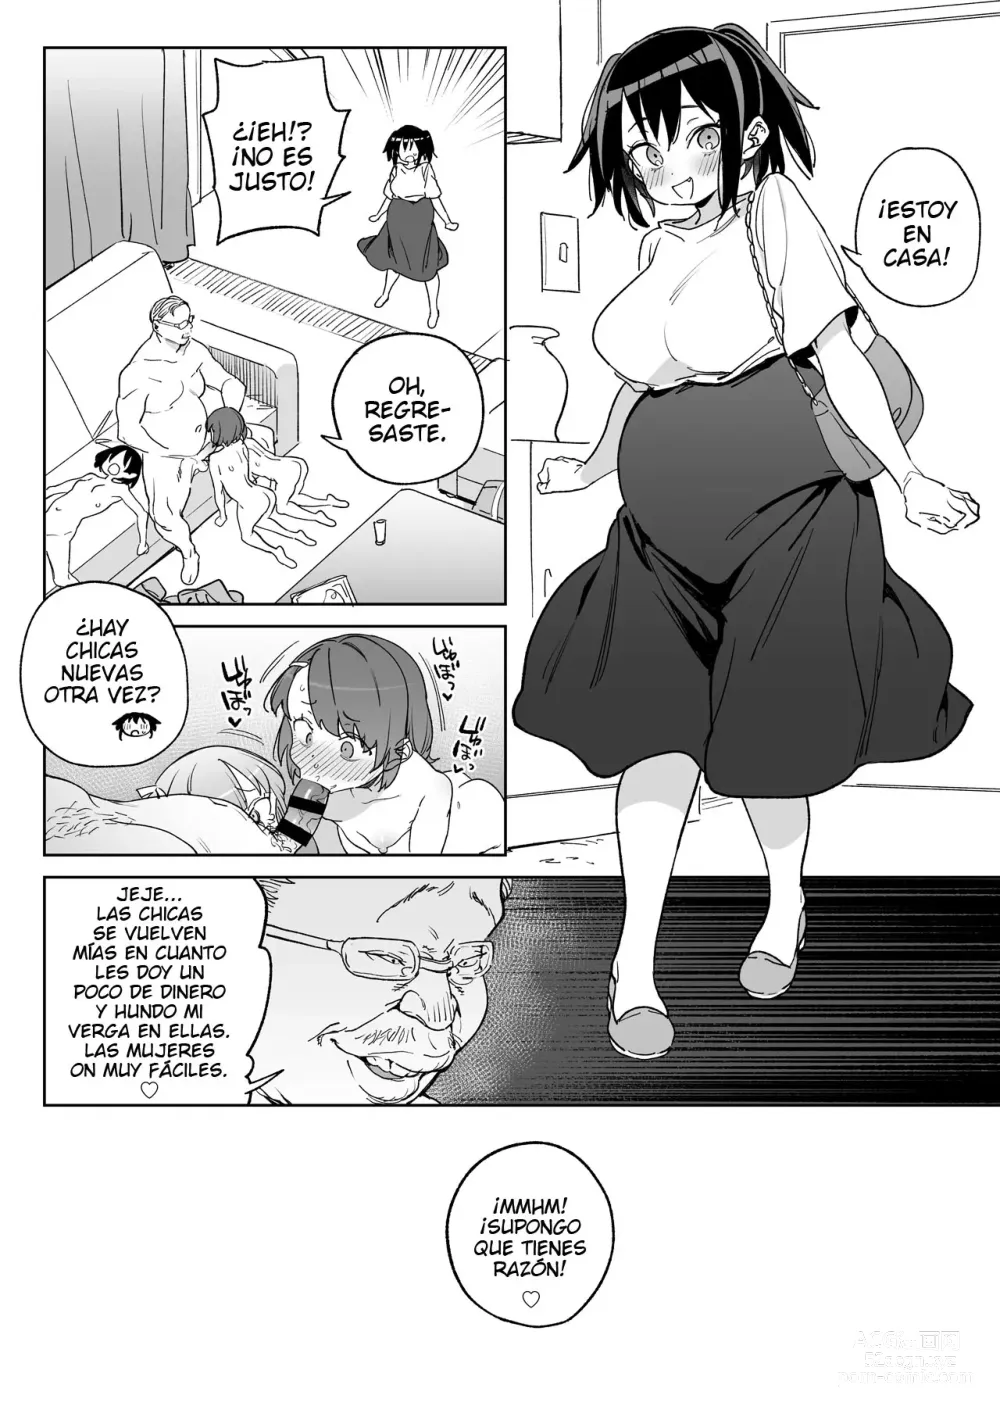 Page 37 of doujinshi November 28th: As of today, I belong to my new daddy!